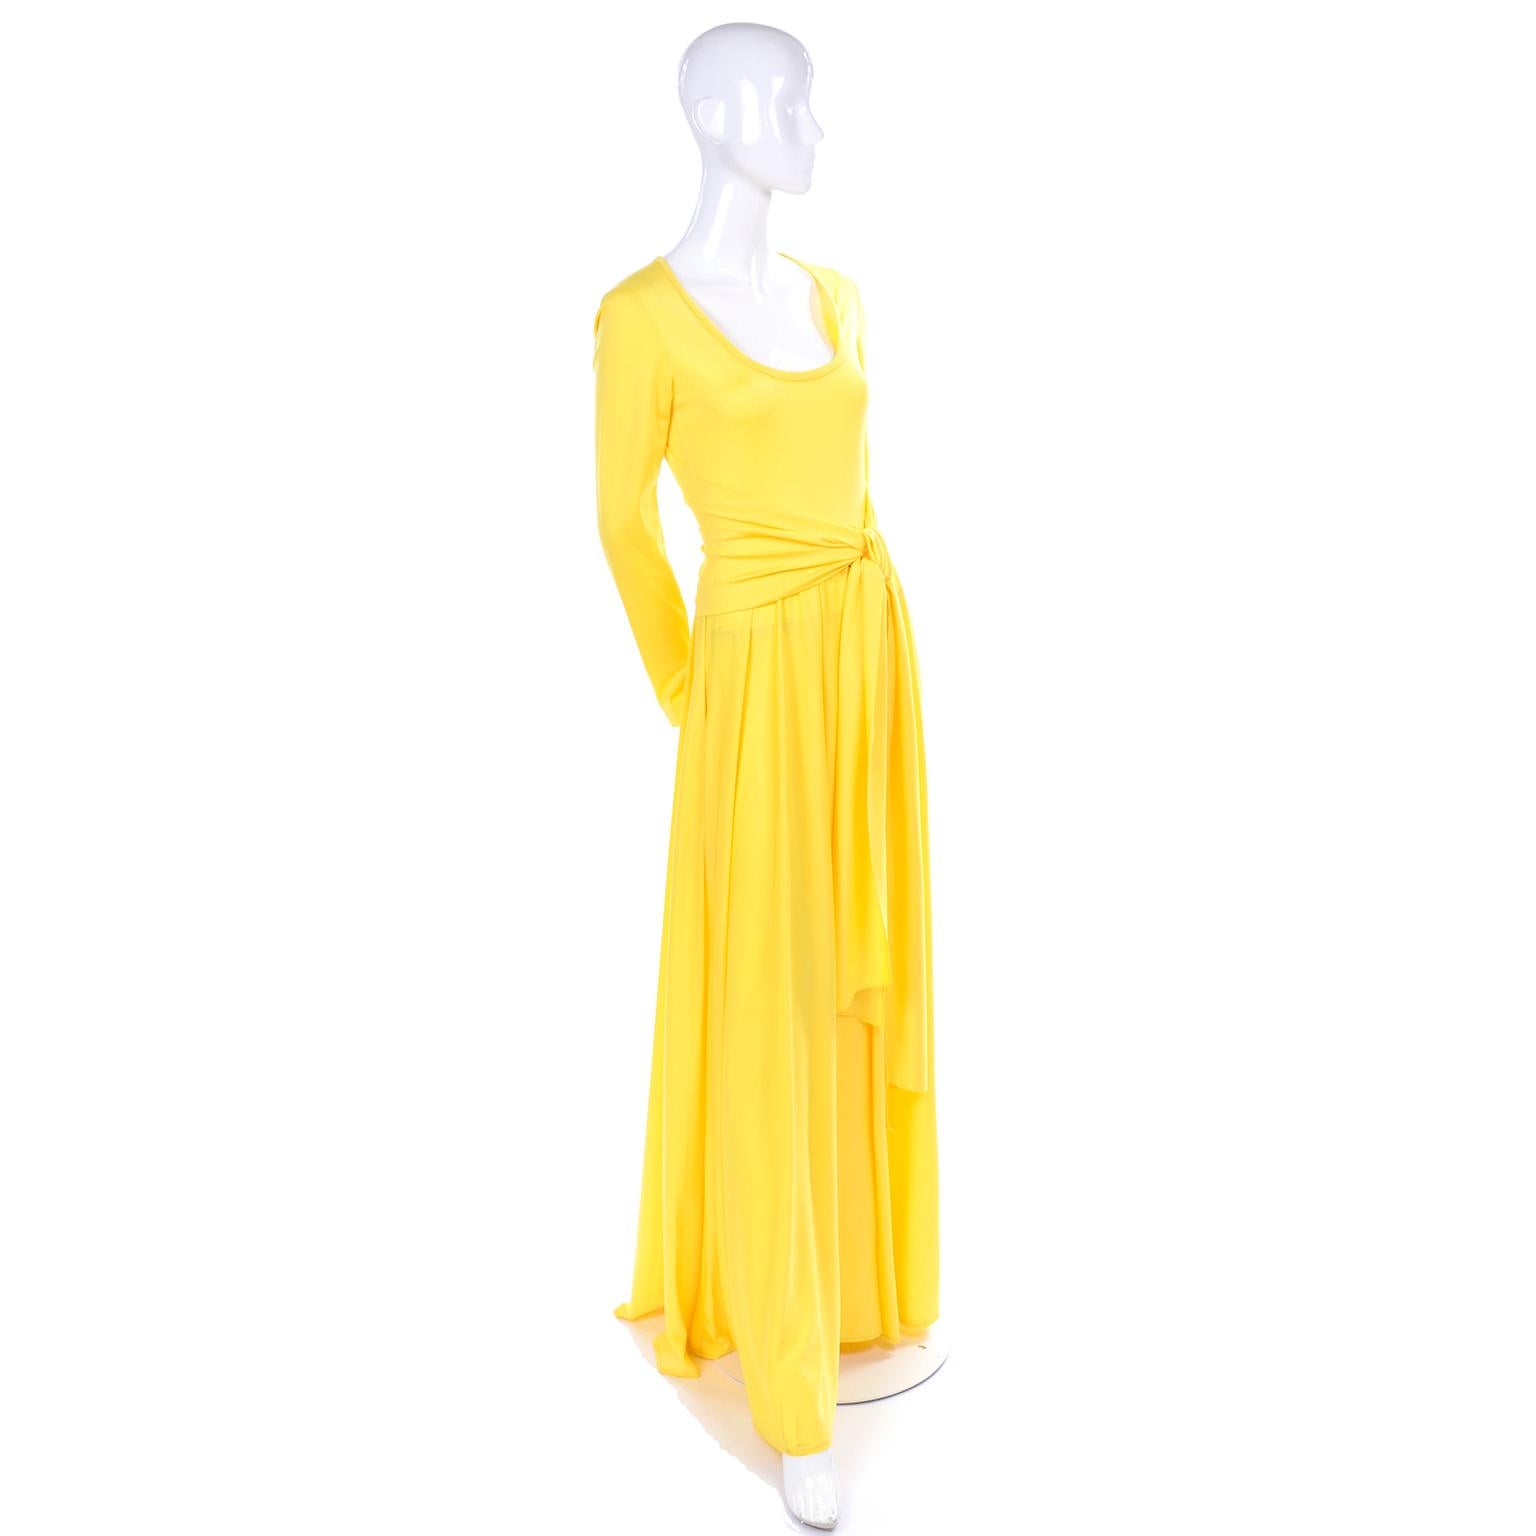 This is a lovely 1970's sunny yellow vintage maxi dress from Lillie Rubin. This fun jersey dress has a self sash and closes with a back zipper. The bodice is fitted, with a scoop neck, and the skirt is voluminous and moves beautifully when worn. The